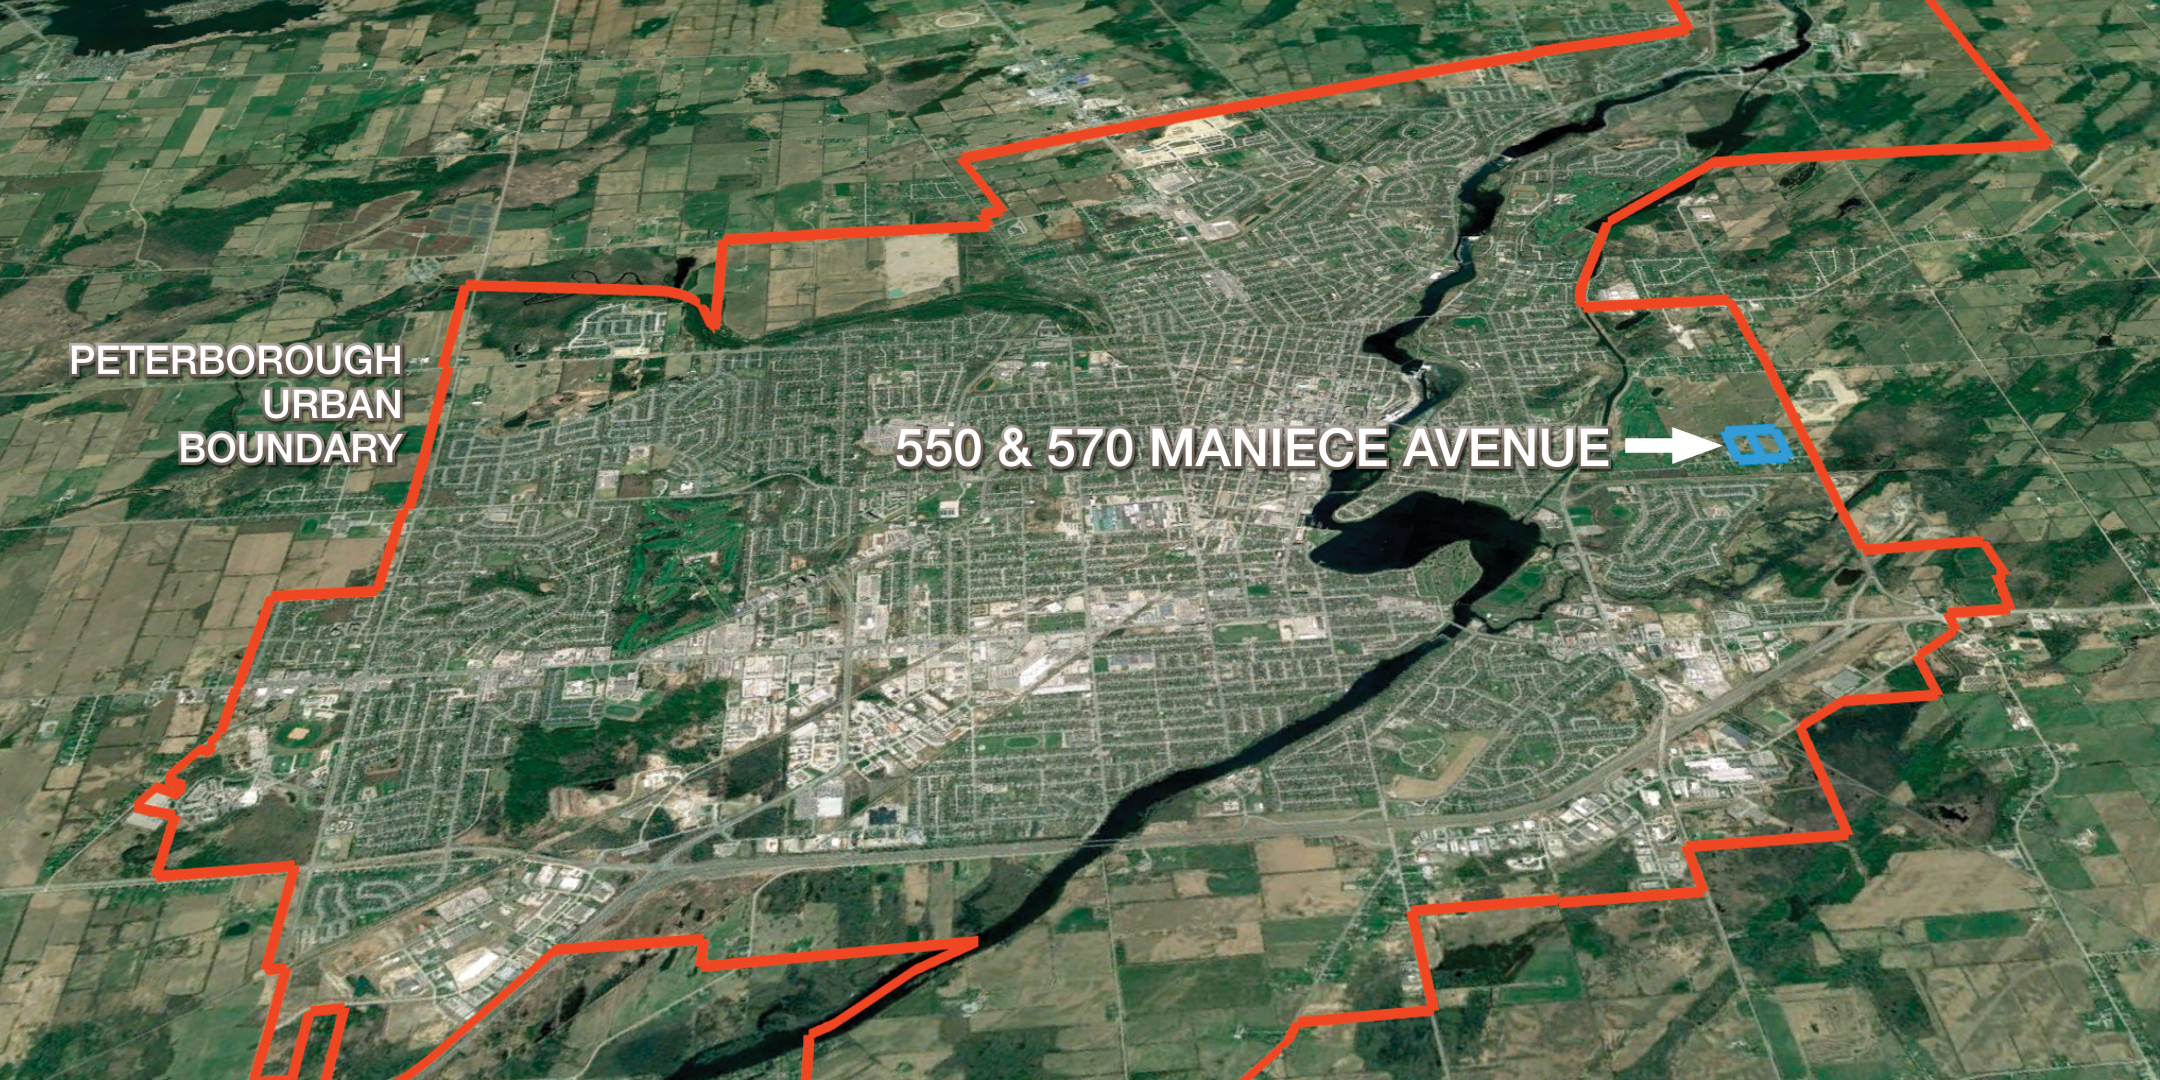 Outline of Welland and subject property